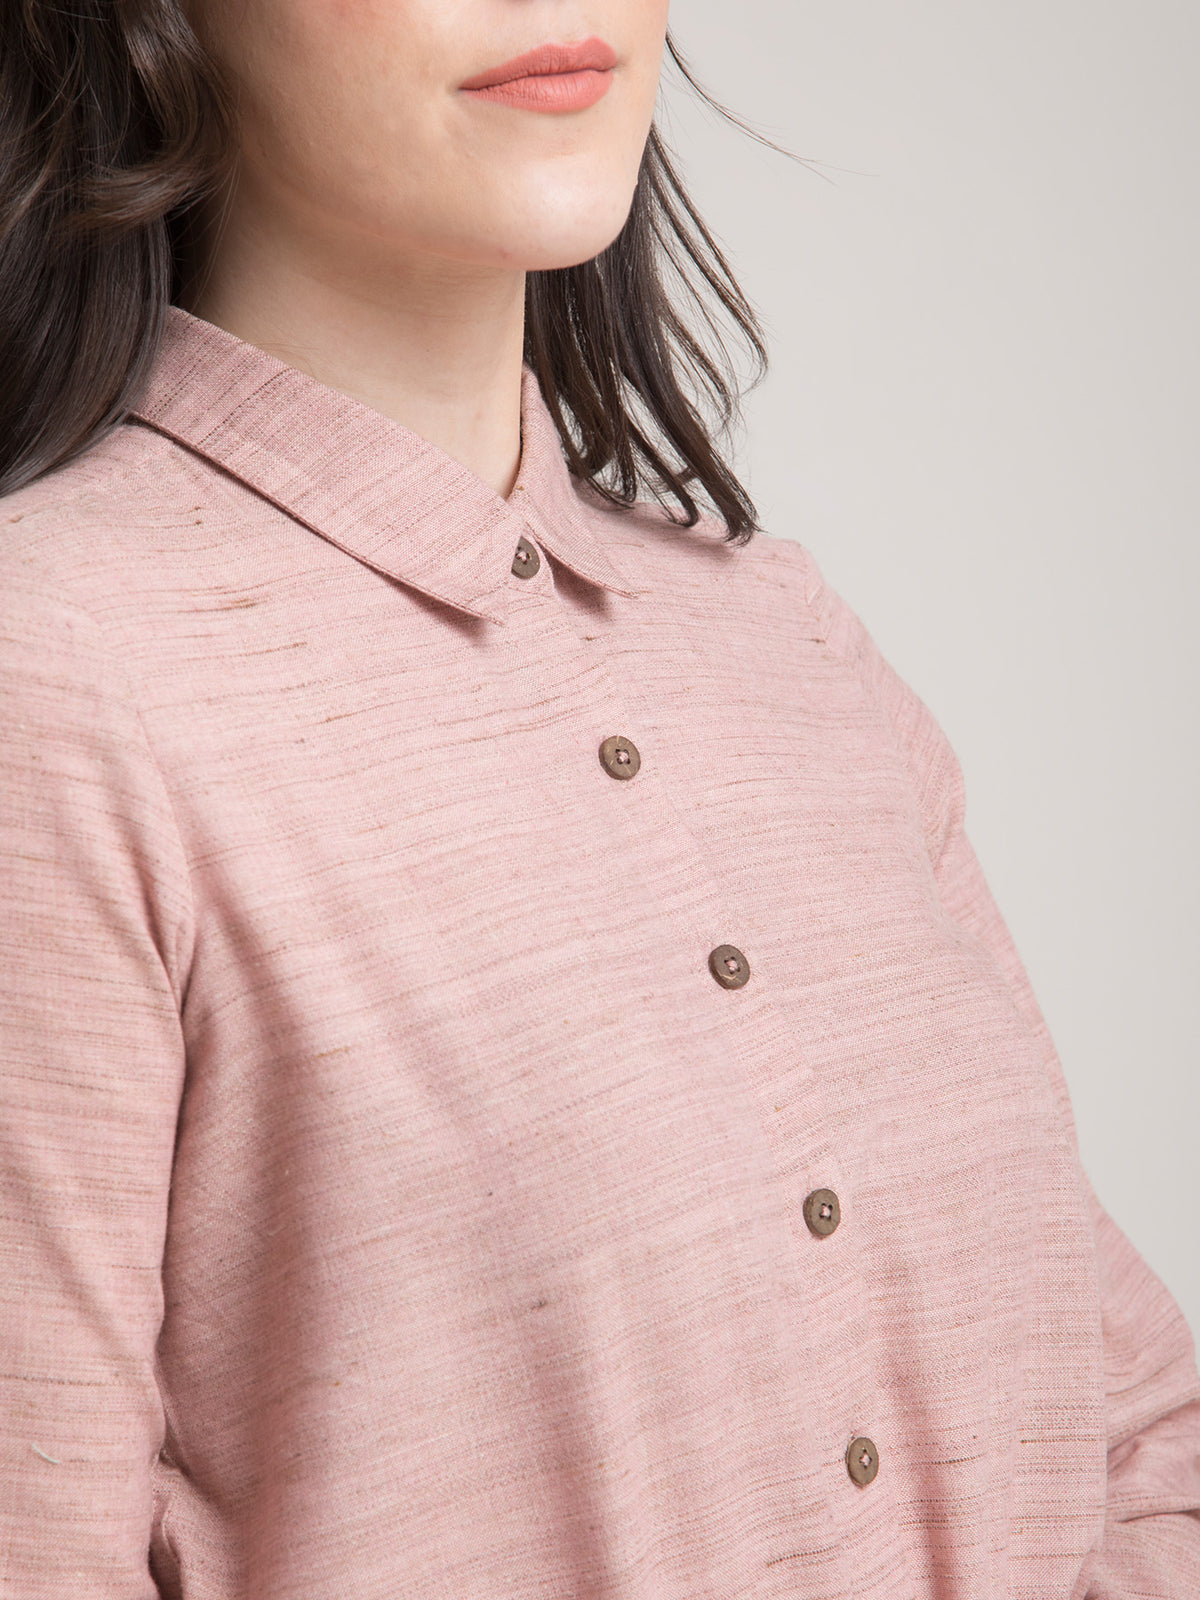 Cotton Yarn Dyed Collared Shirt - Dusty Pink